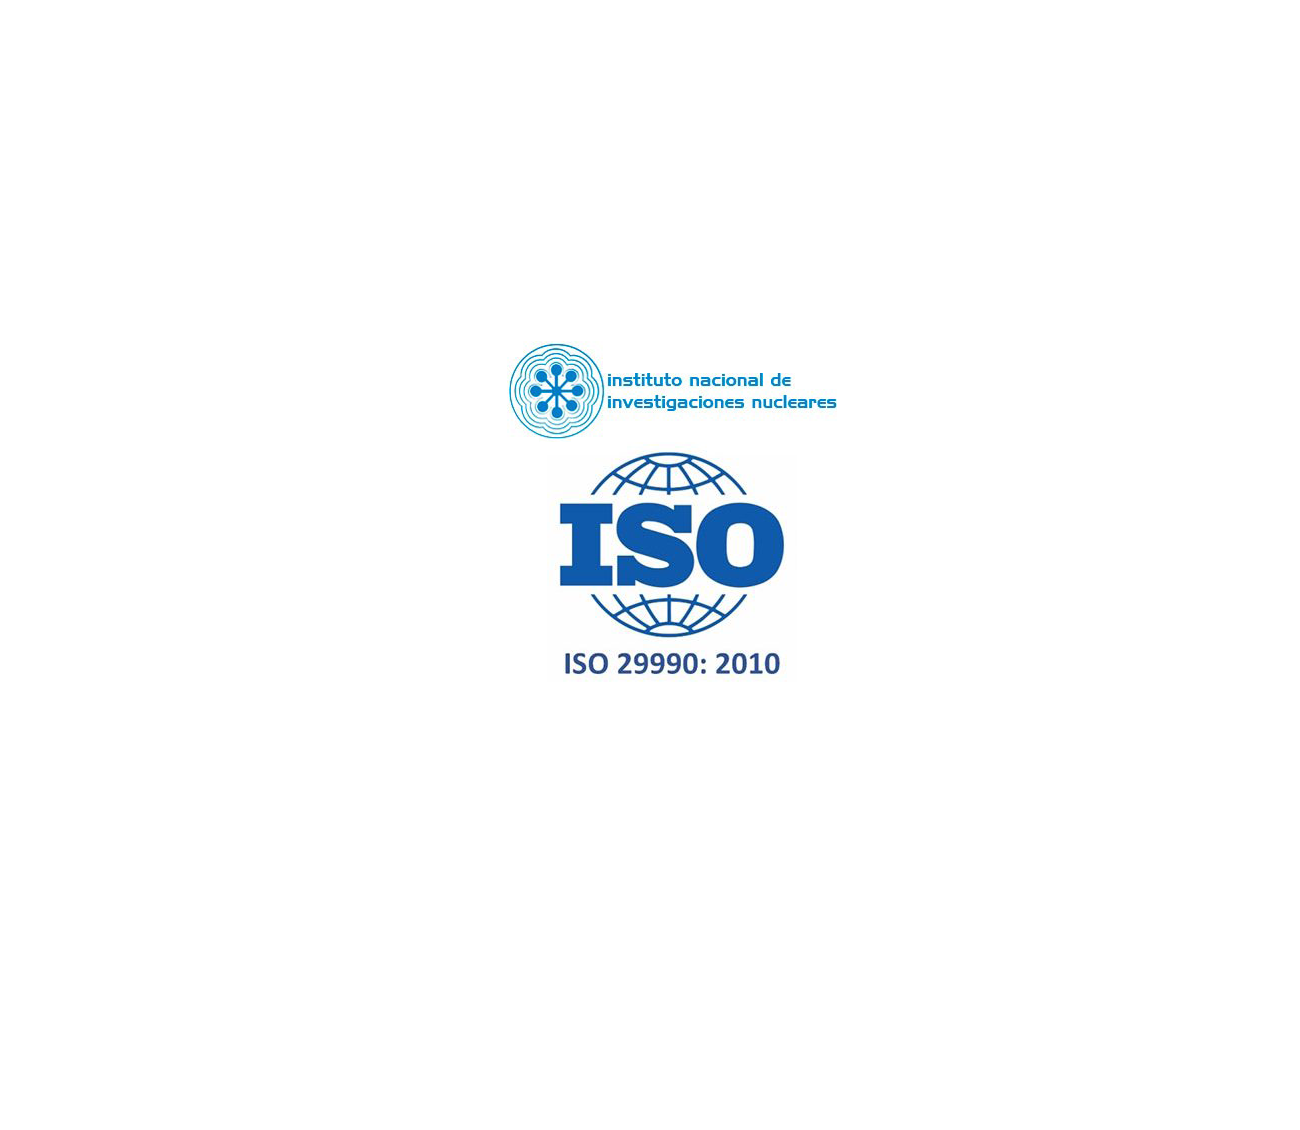 NSSC: The Mexican National Nuclear Research Institute (ININ) achieves ISO 29990:2010 Certification